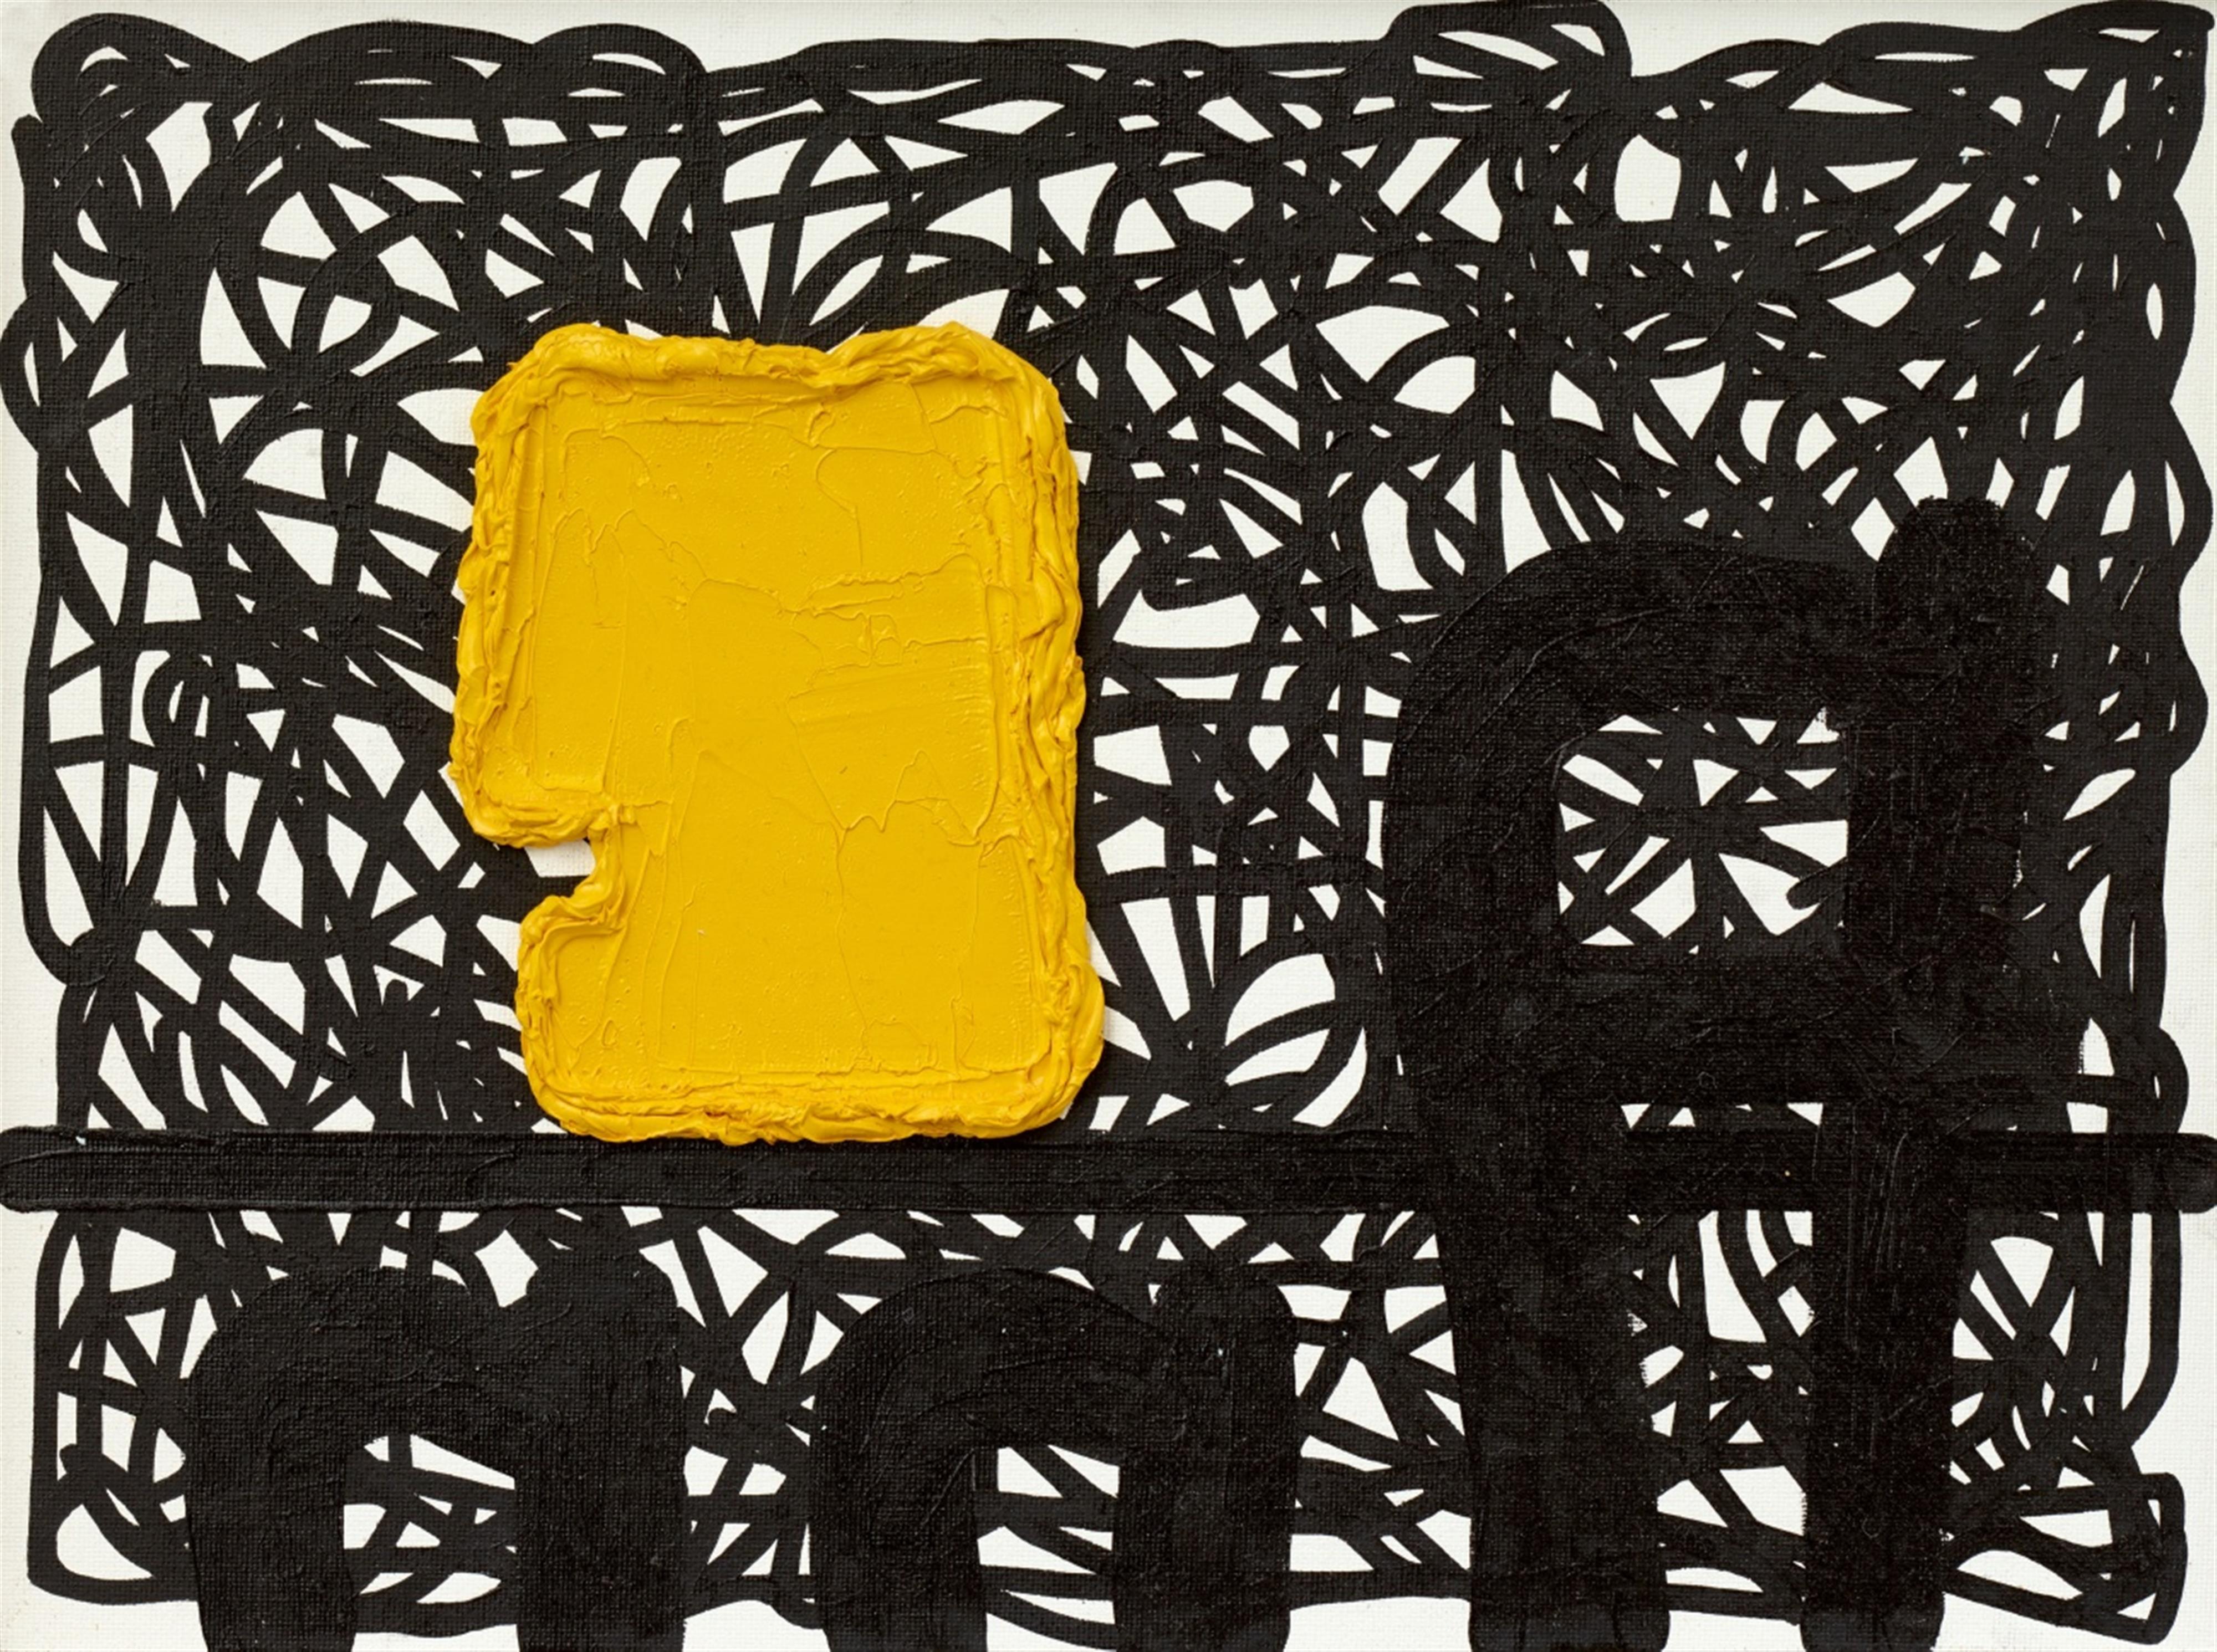 Jonathan Lasker - Story with Affect - image-1